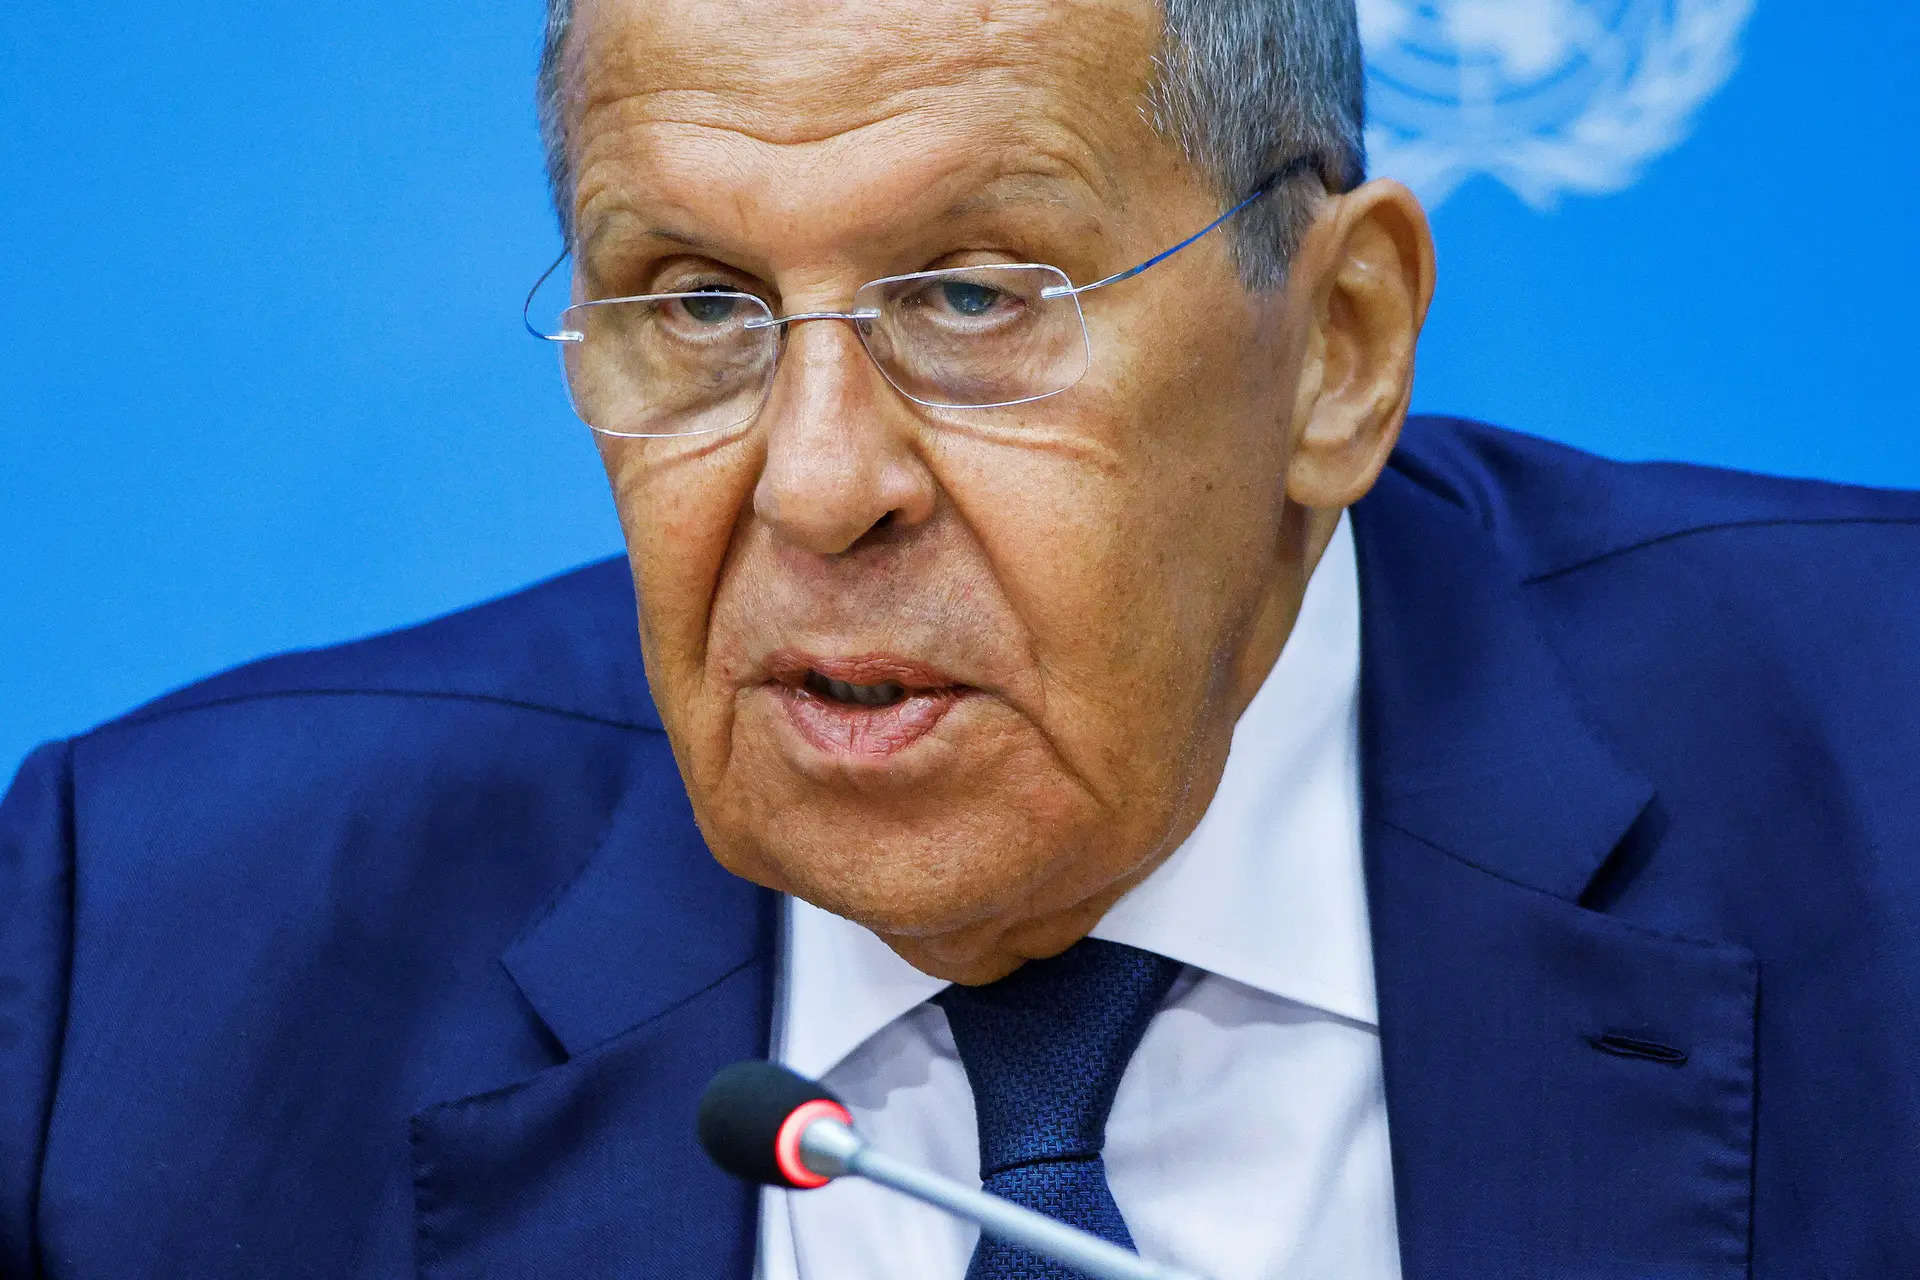 India subject to enormous, completely unjustified pressure due to energy ties with Russia: Russian FM Lavrov 